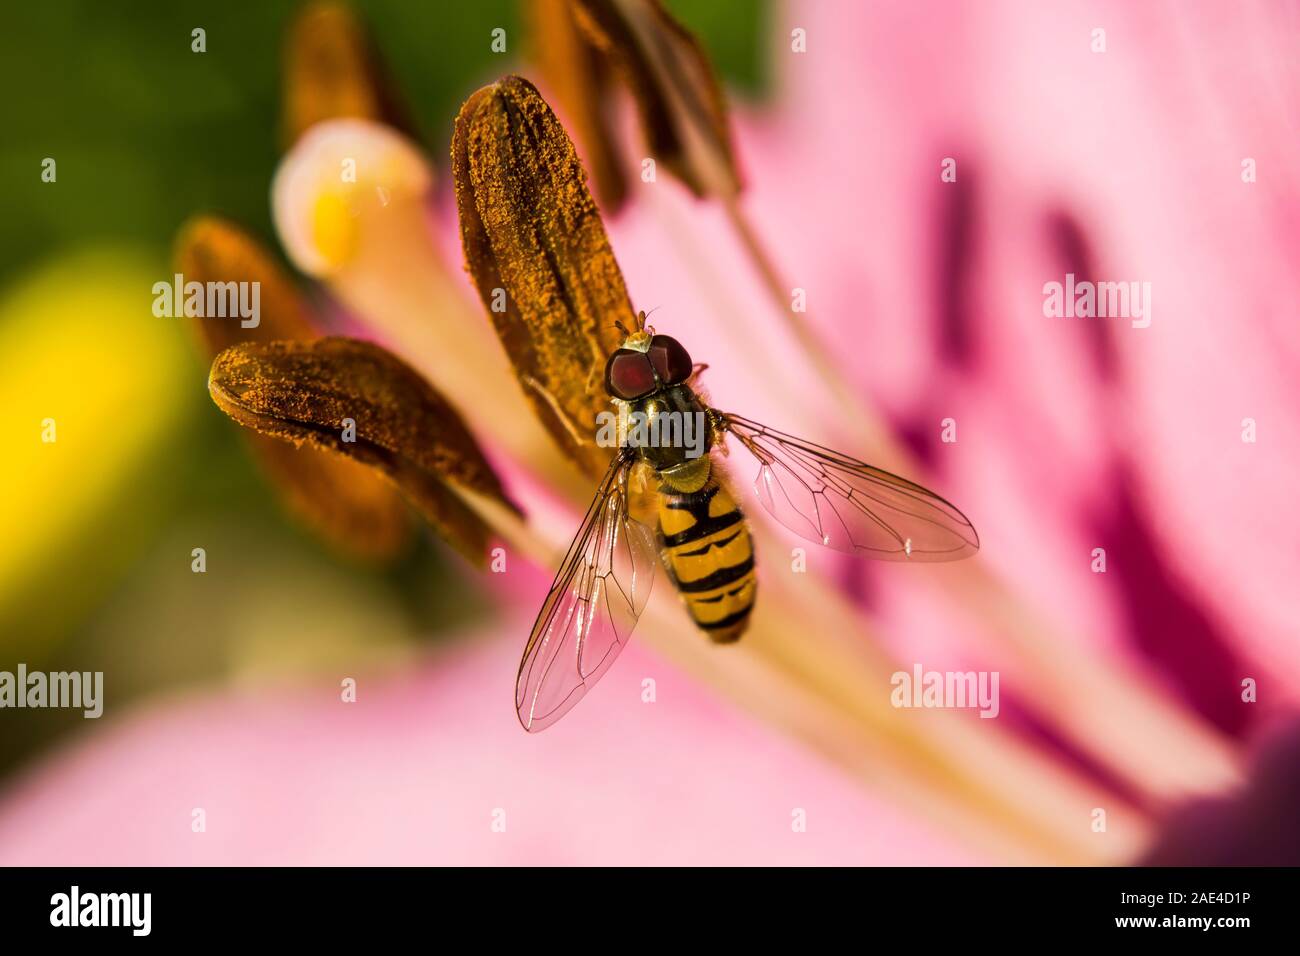 Hoverfly in the flower Stock Photo